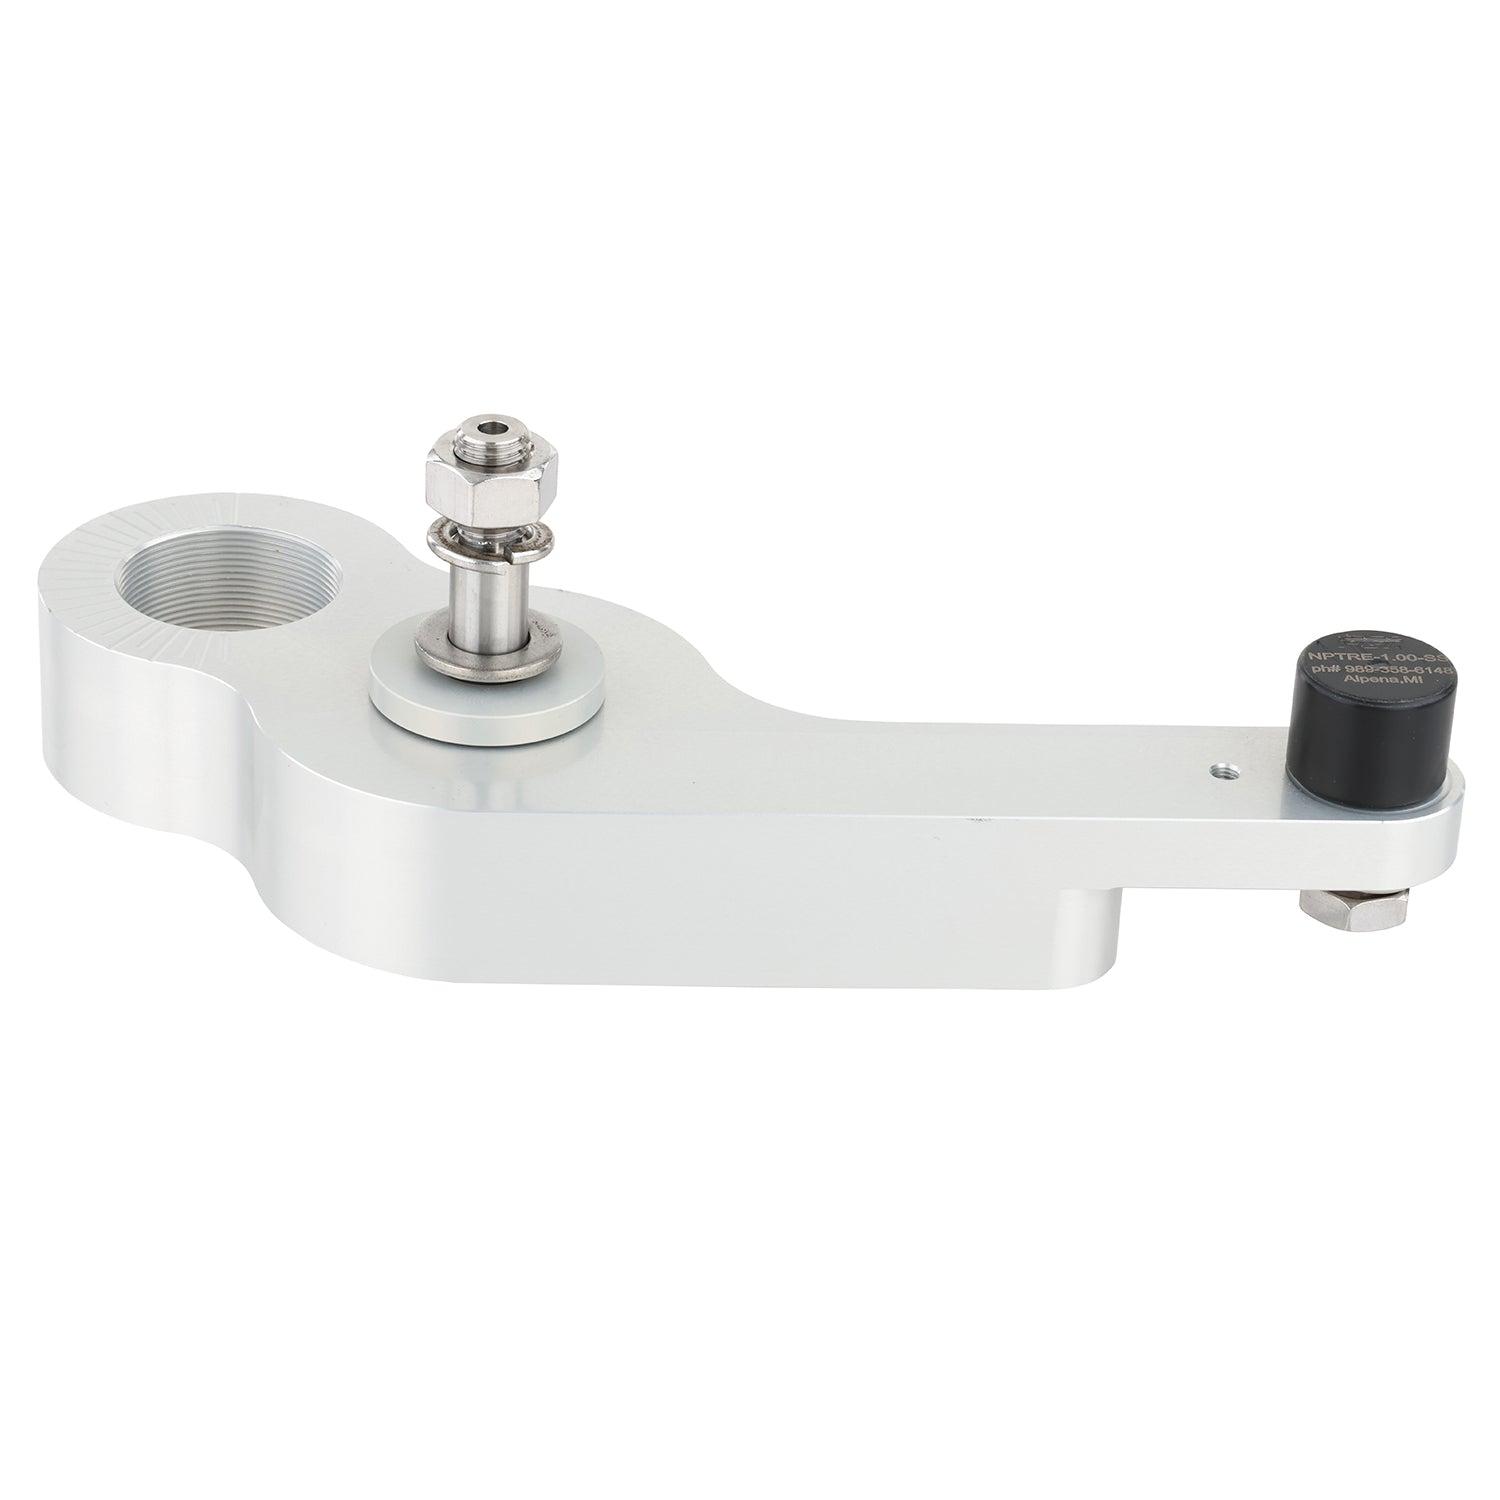 Grey hard anodized swing arm part, with threaded hole on one end and a black cam follower mounted to the narrow end. Stainless steel hardware is pressed through the center of the part. Part shown on a white background. 